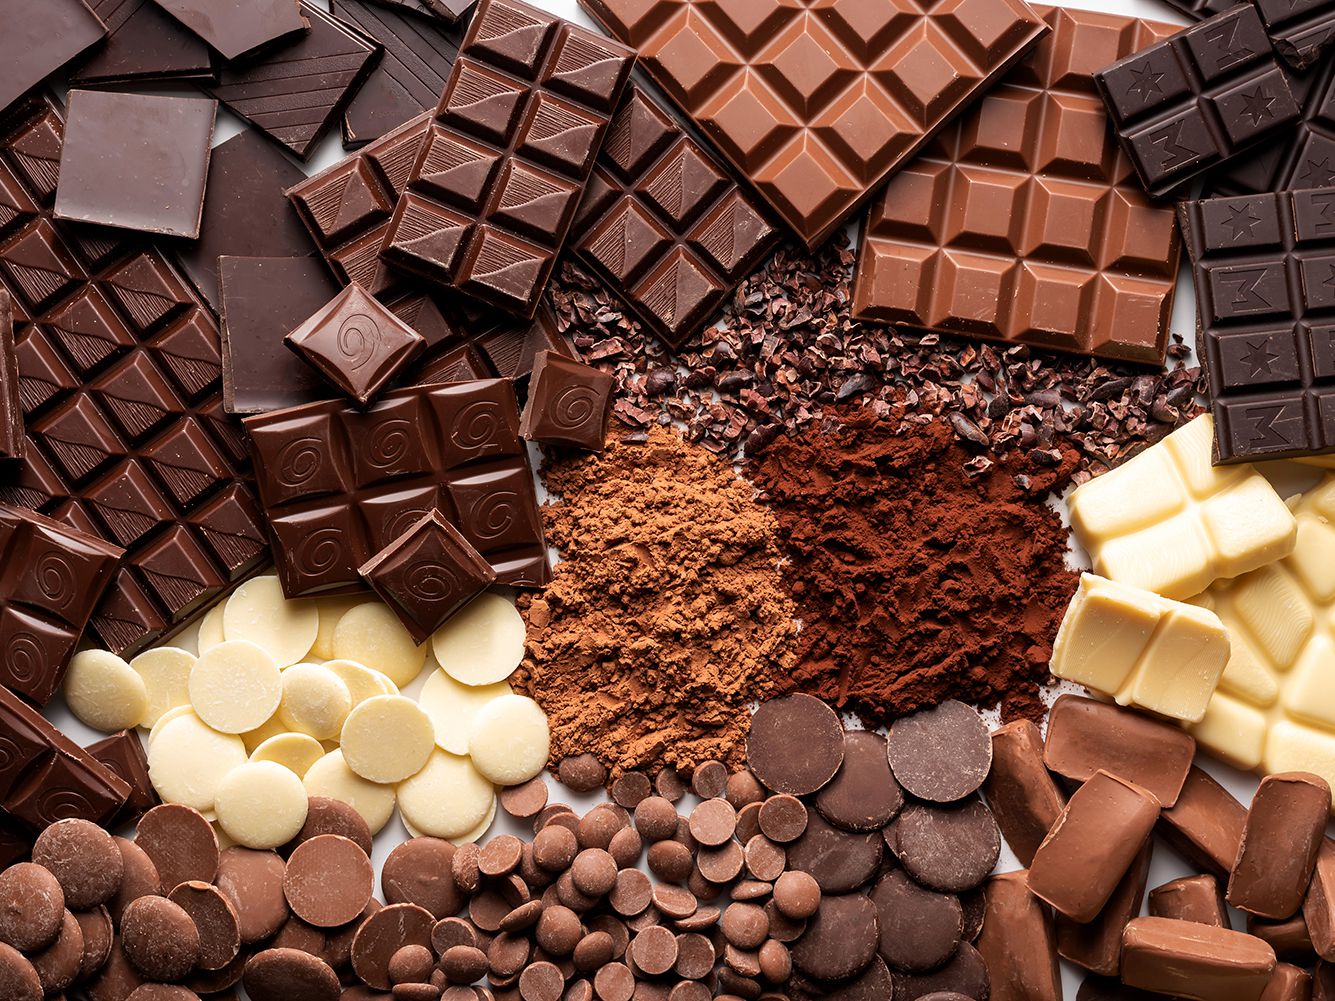 Photograph of different types of chocolate, milk, dark, white and also coco powder.